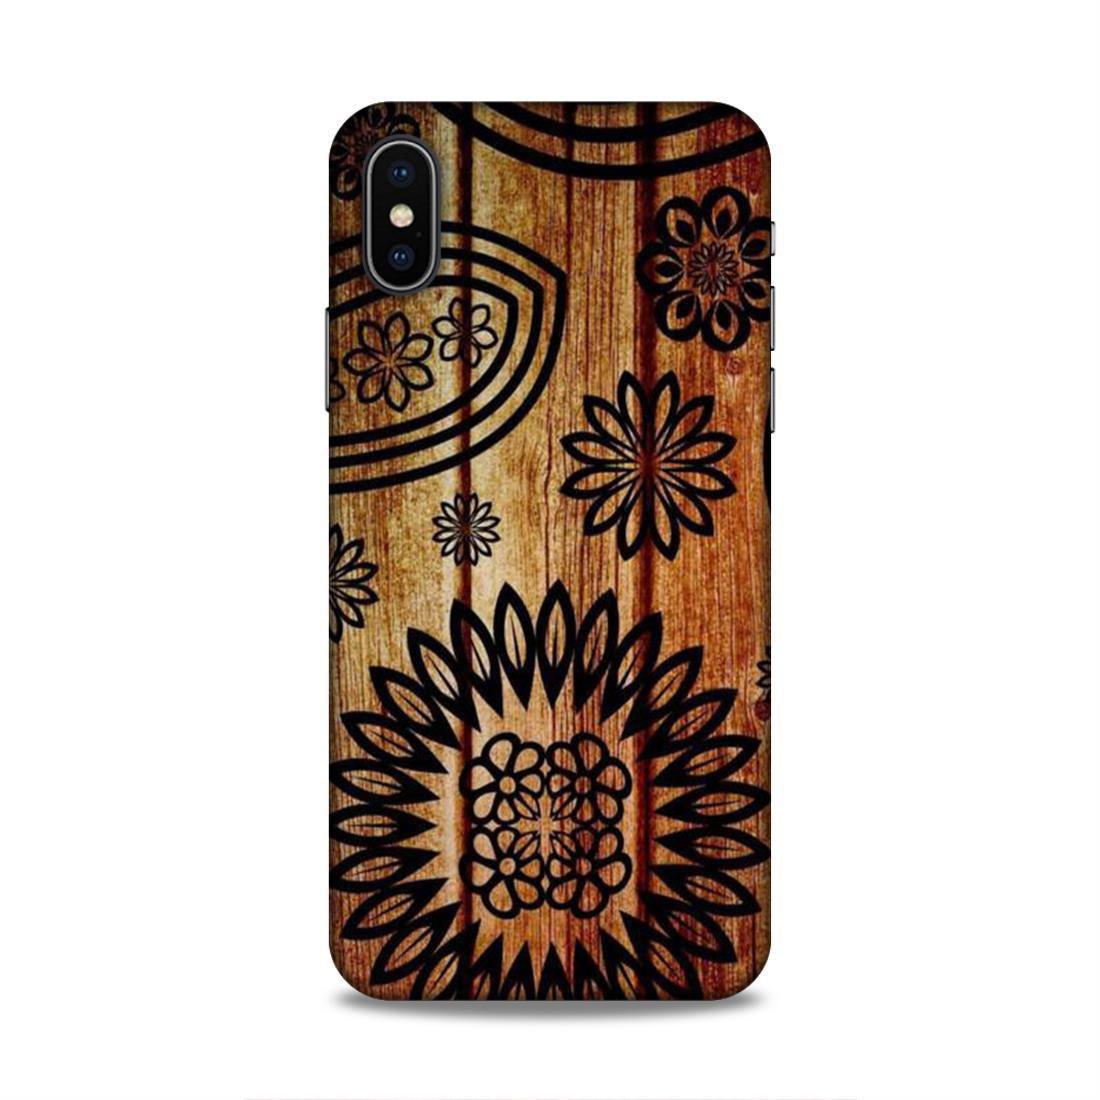 Wooden Look Pattern iPhone X Mobile Case Cover